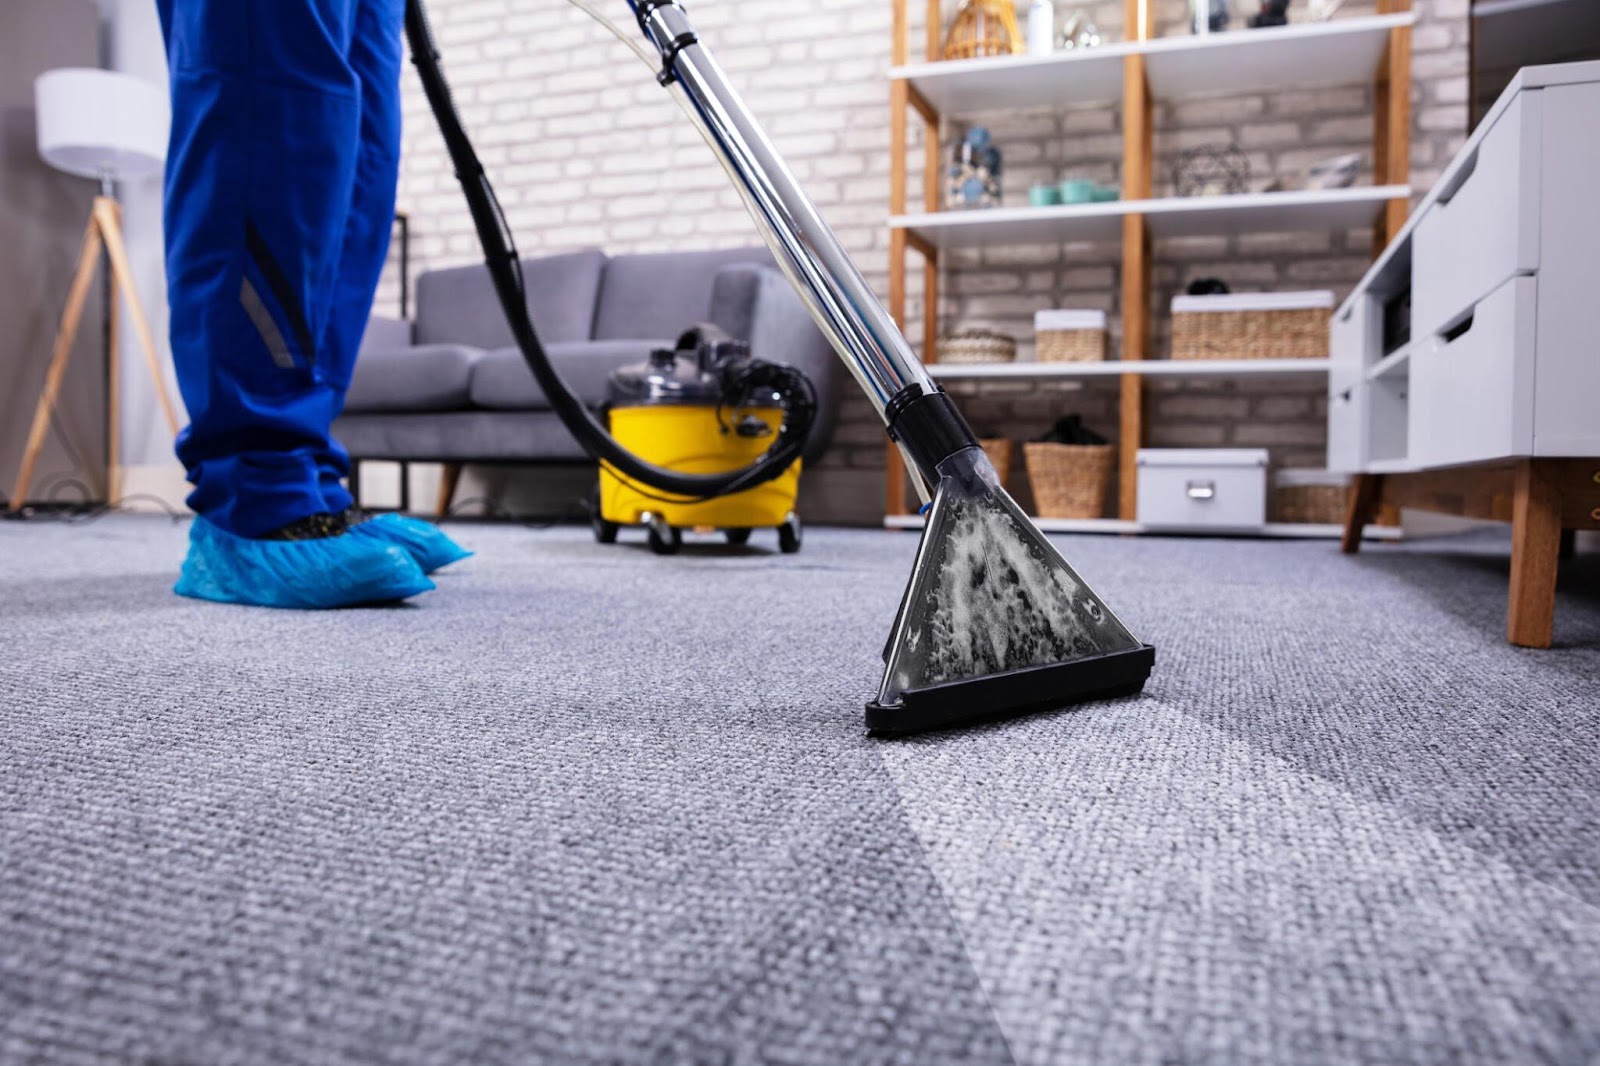 Maintaining a Sparkling Space: A Guide to Facility Cleaning and Rug Care